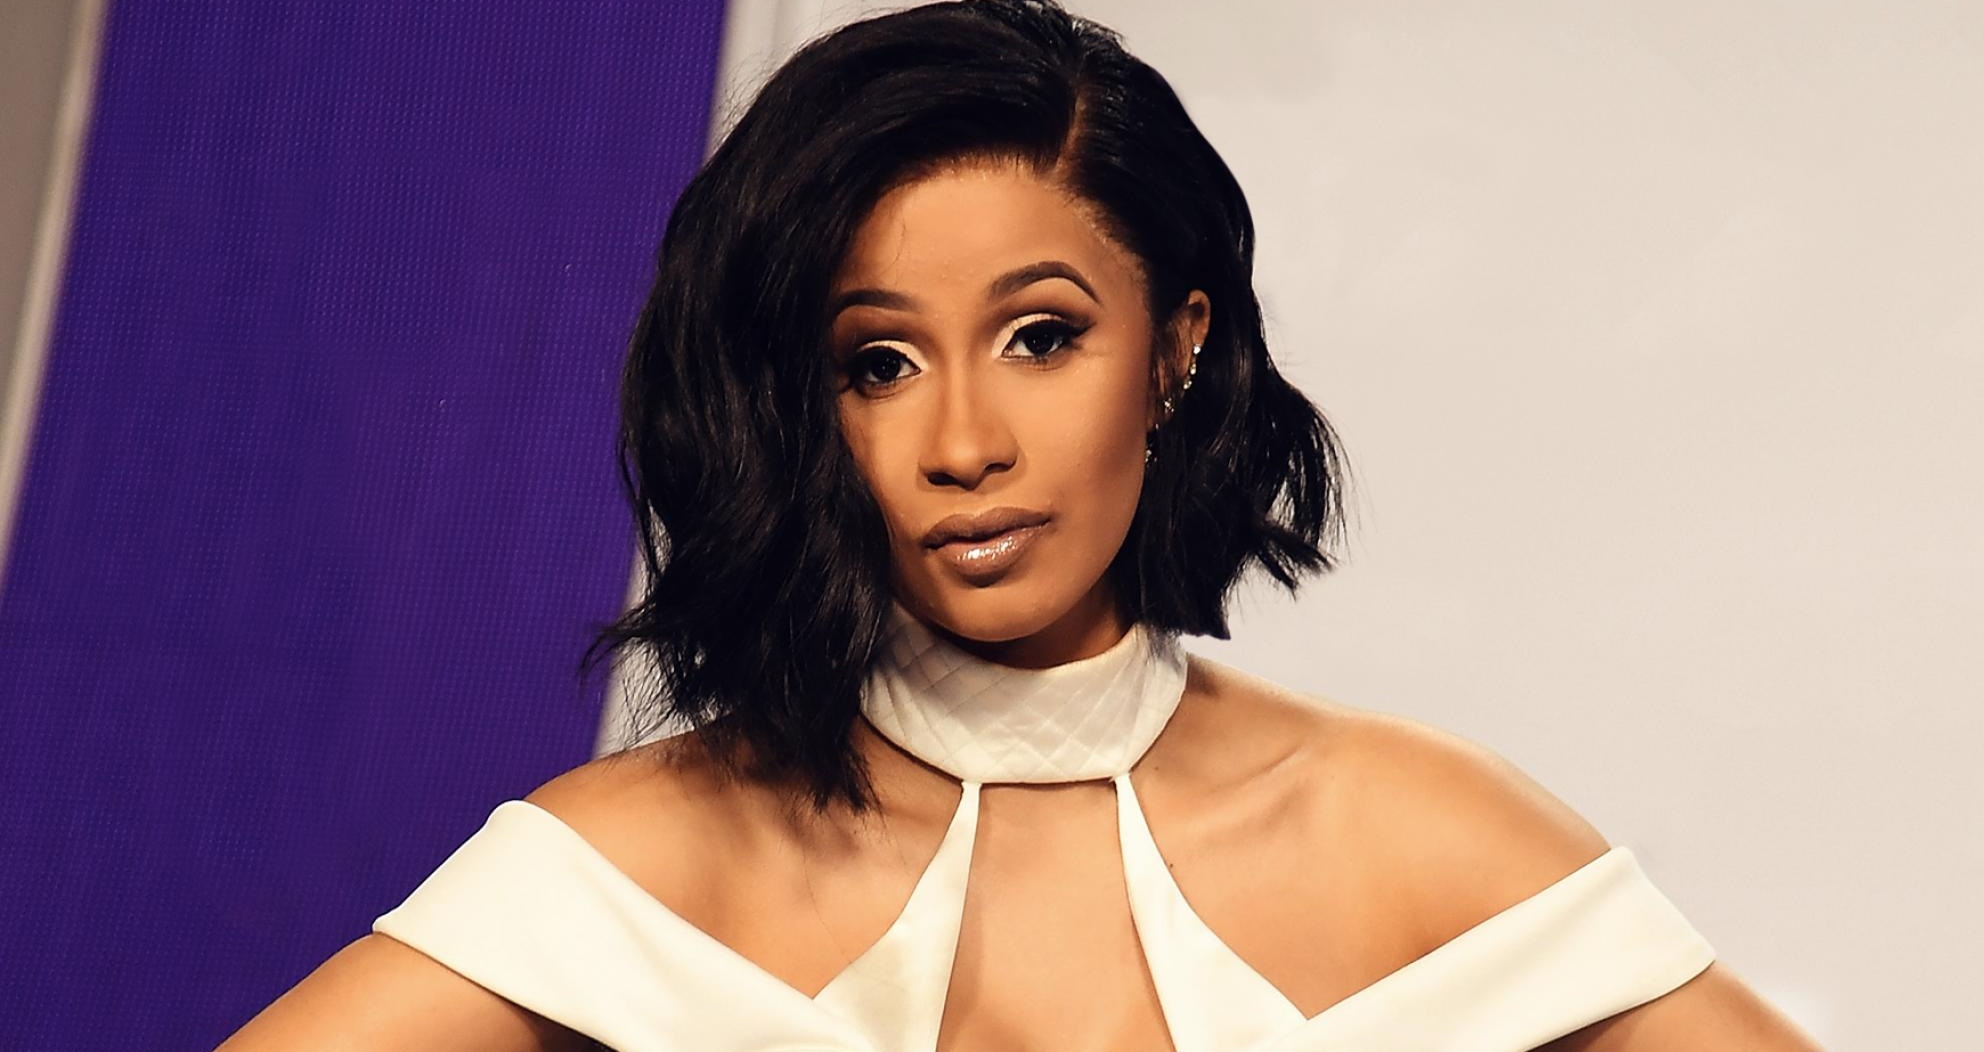 Cardi B Earns Her Third #1 on Billboard Hot 100, as her Maroon 5 Collab Rockets to the Top!